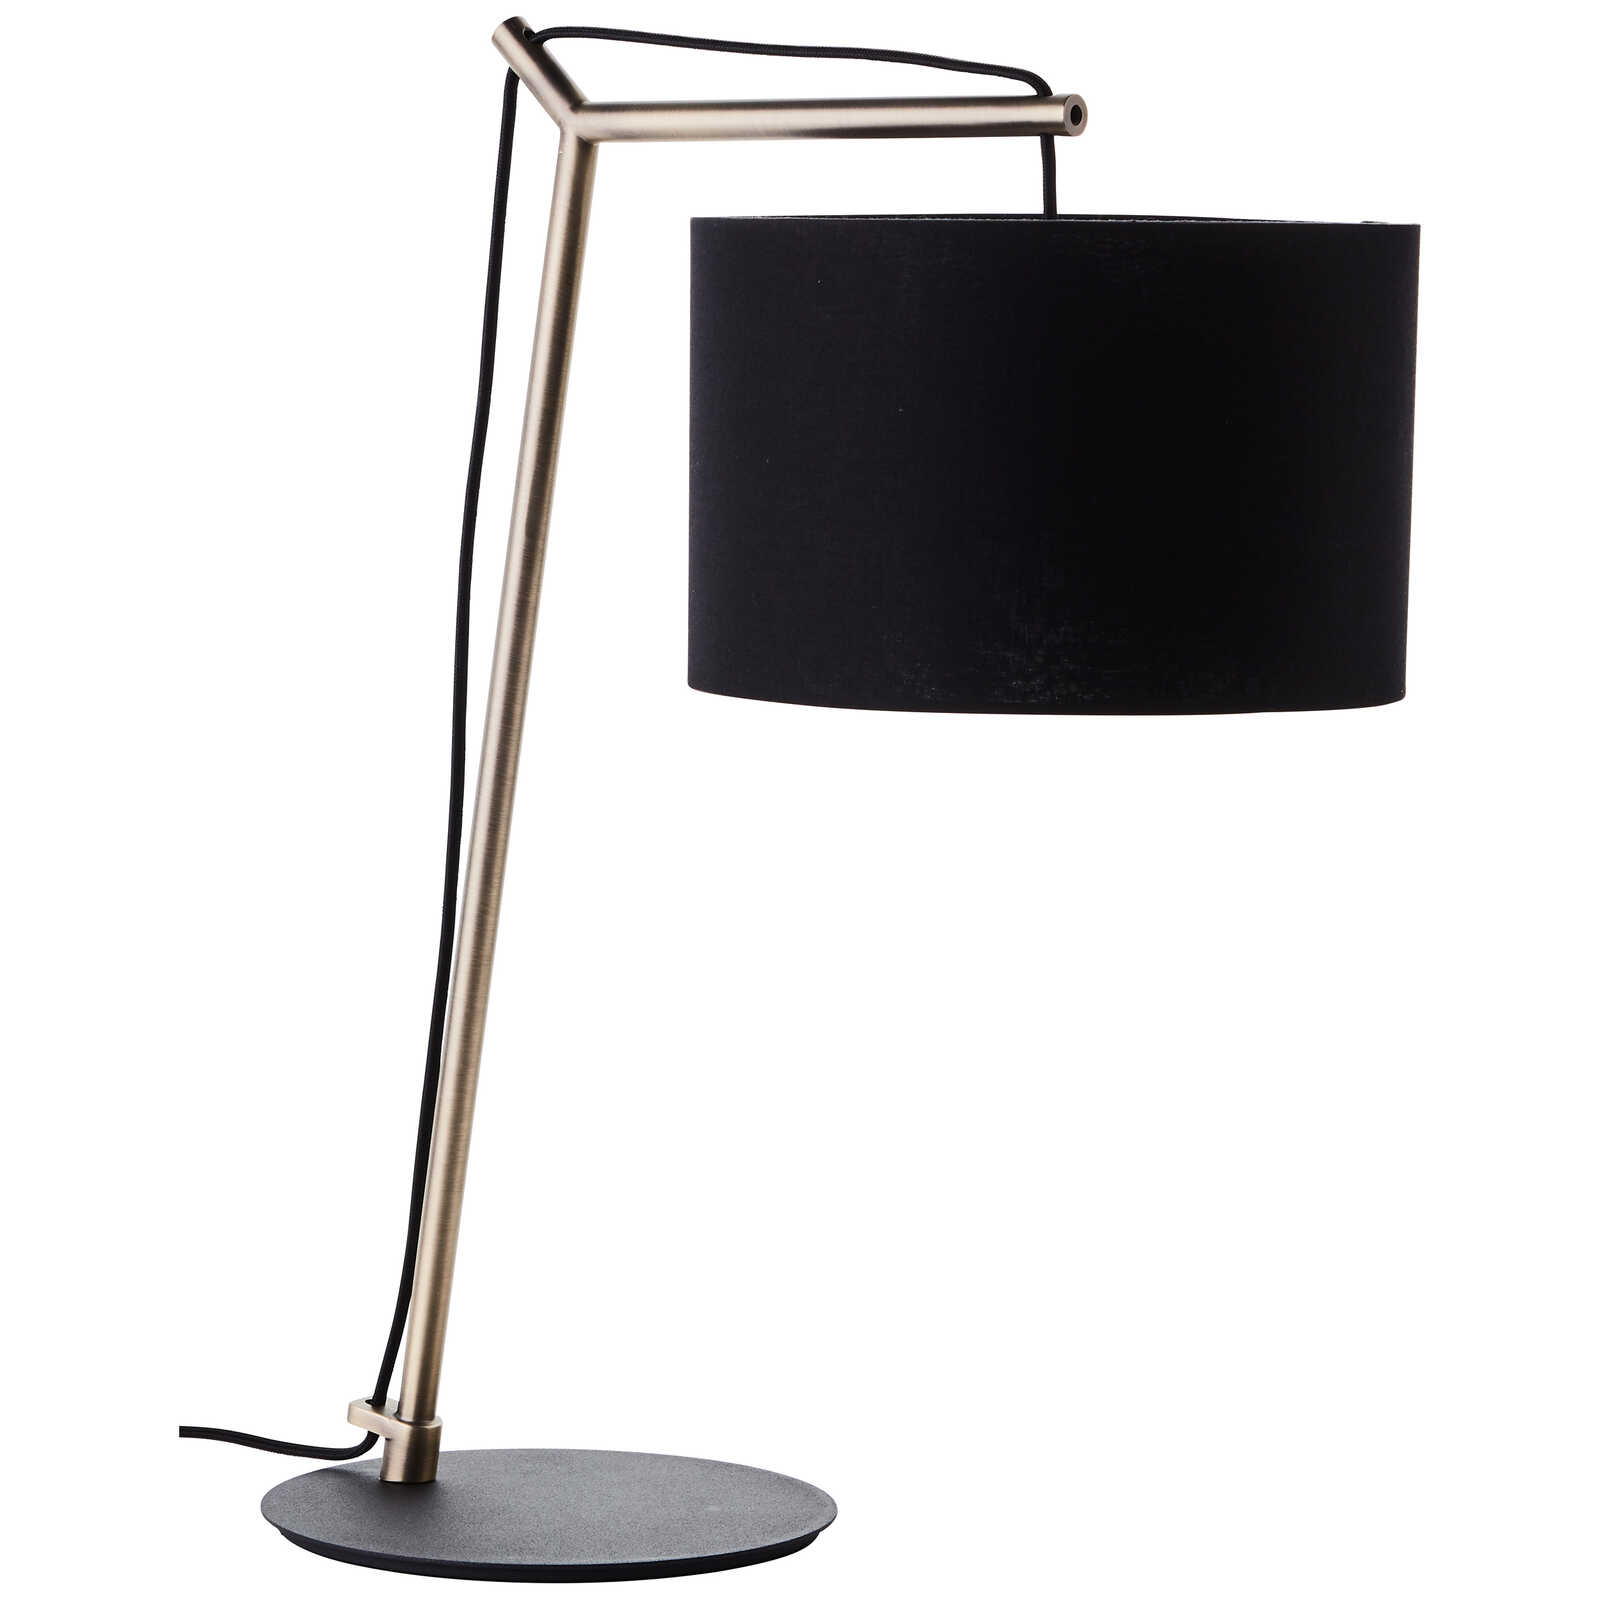             Textile table lamp - Alisa 1 - Gold
        